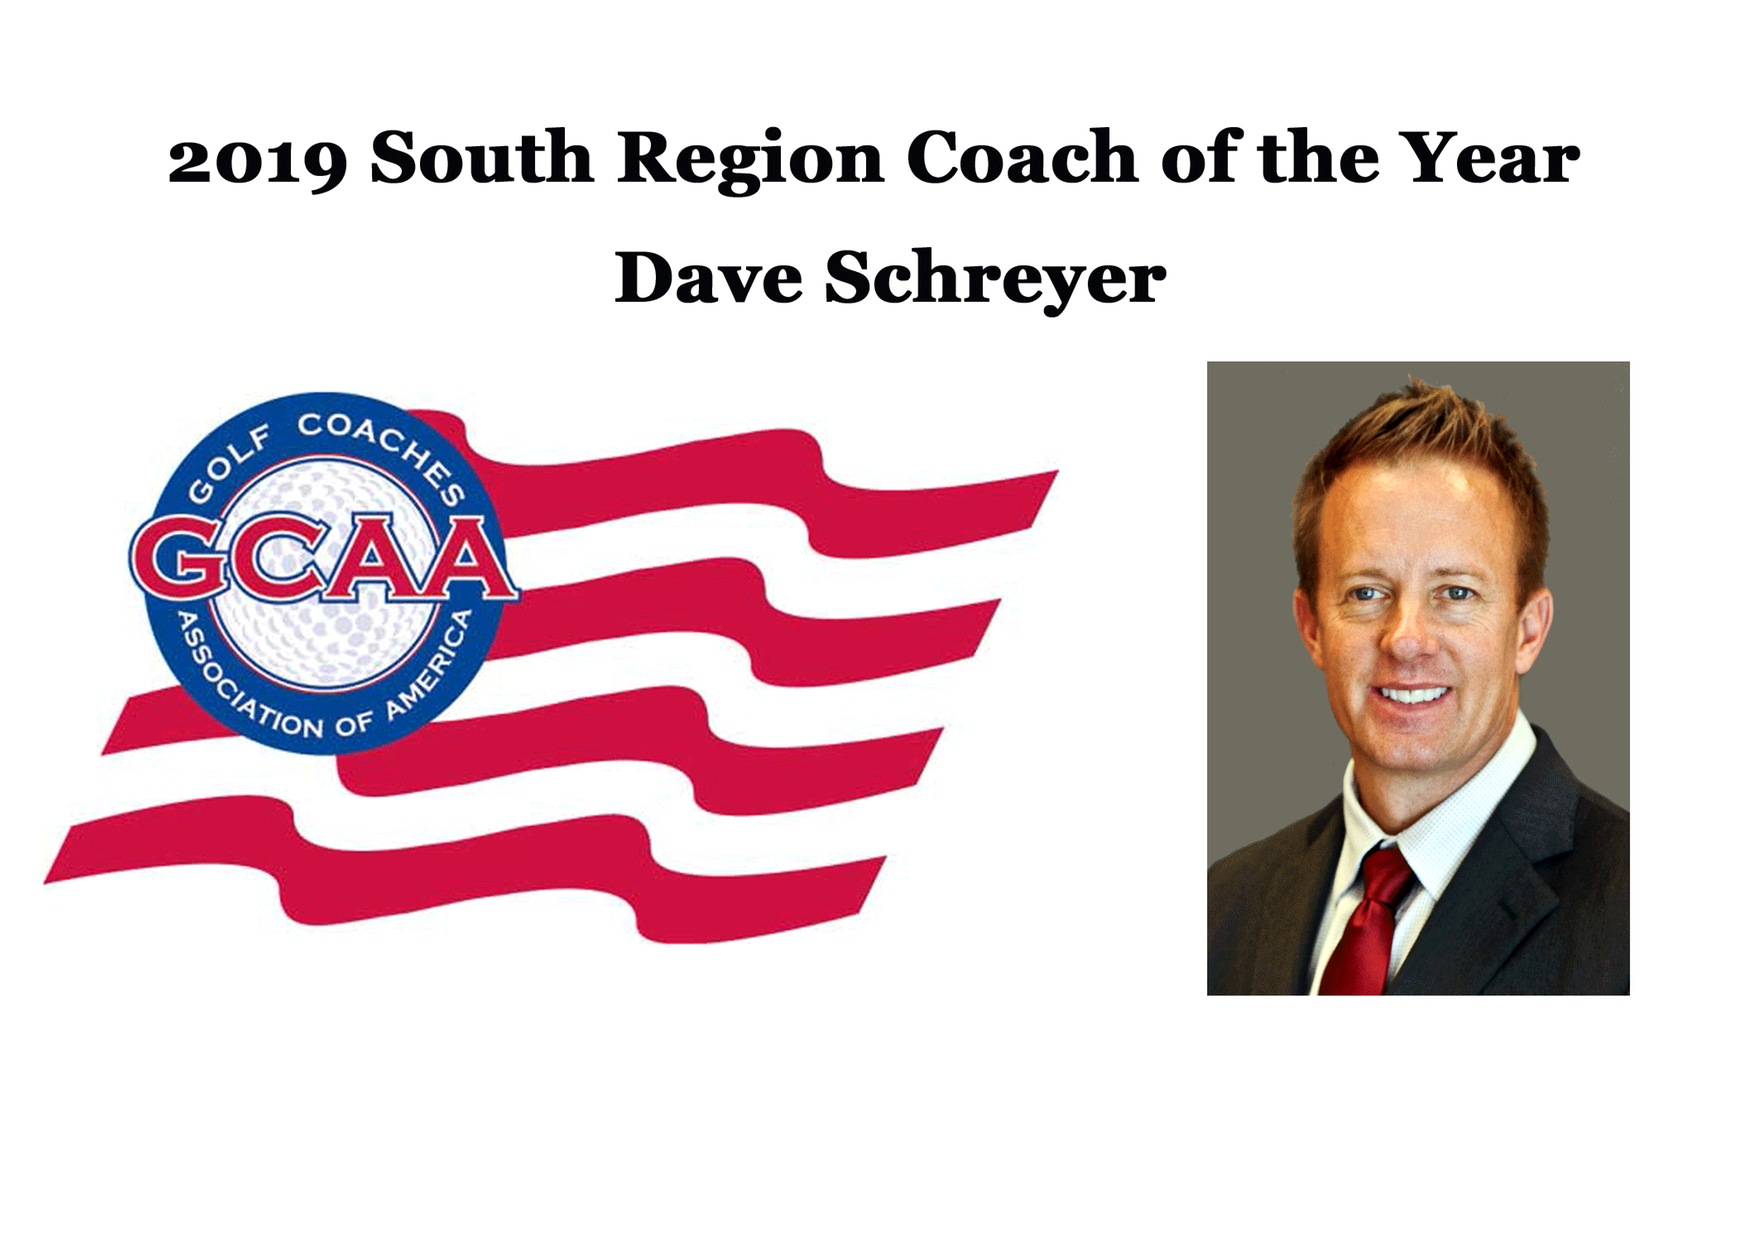 Schreyer recognized as South Region Coach of the Year